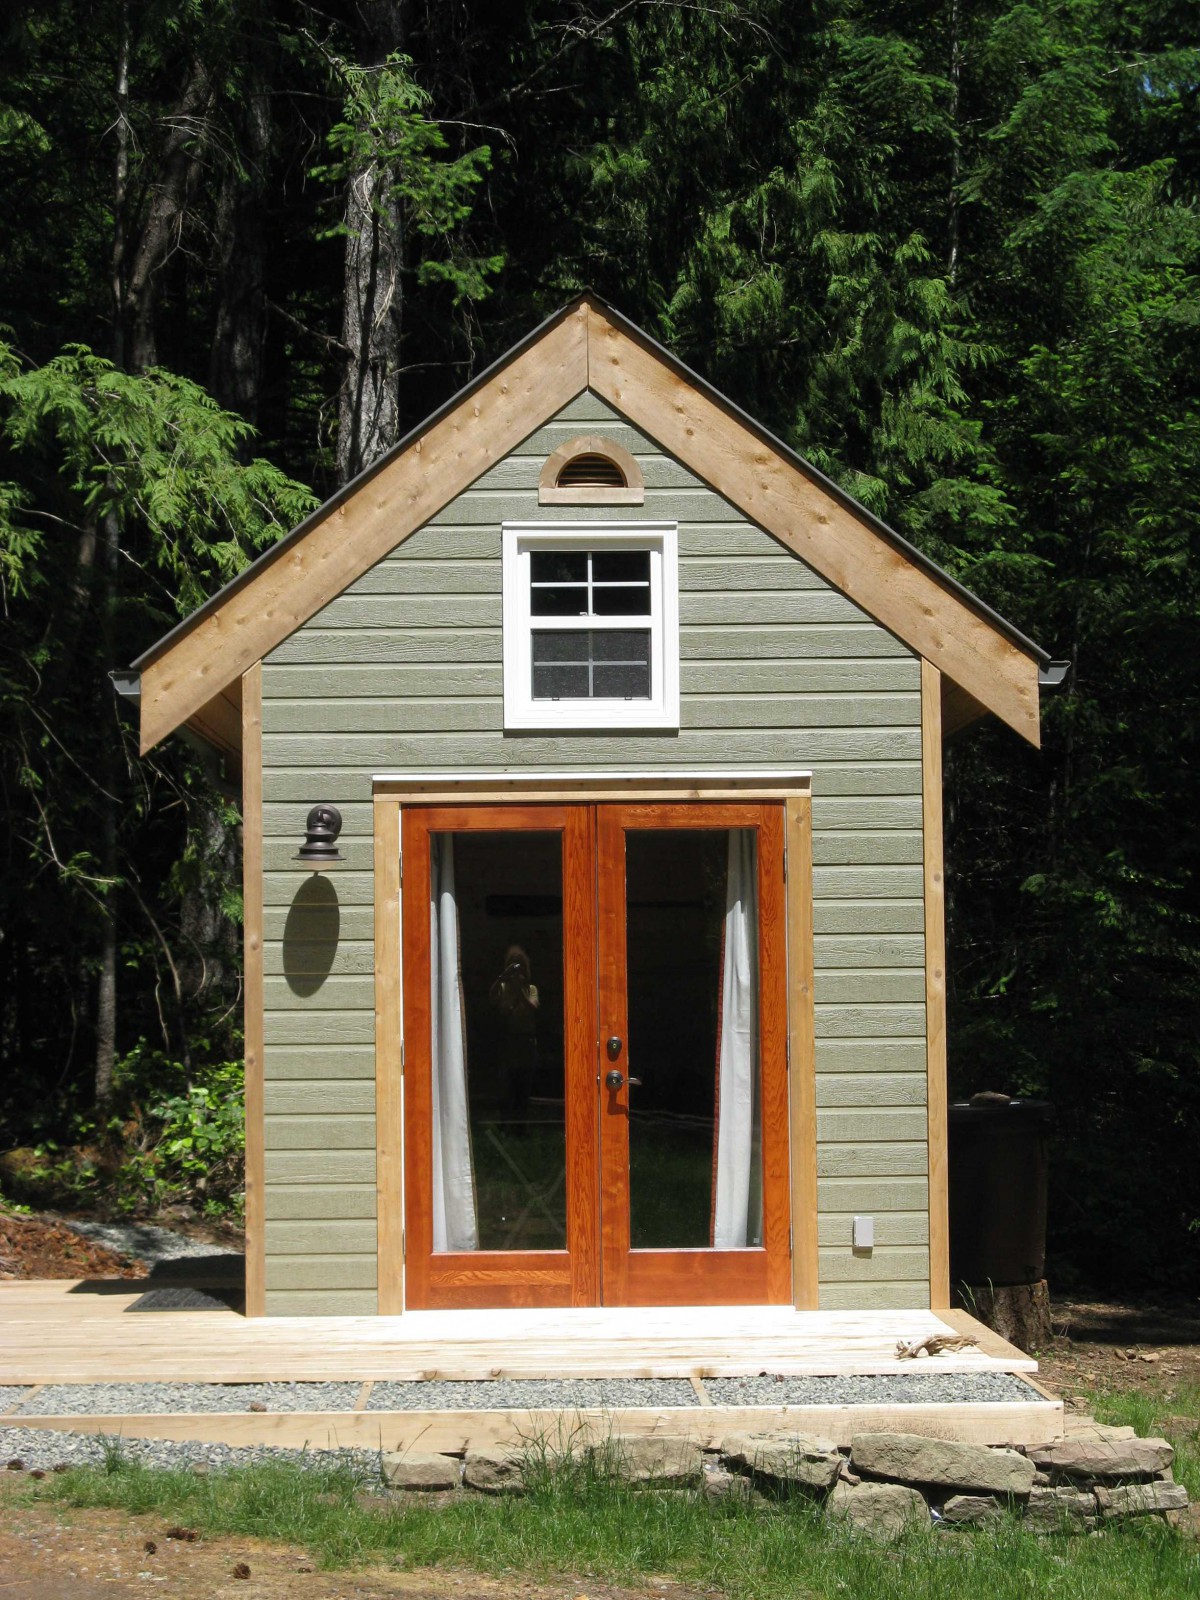 Telluride Wood Workshop design in the garden 9x12 with large single hung window seen from the right. ID number 2887.